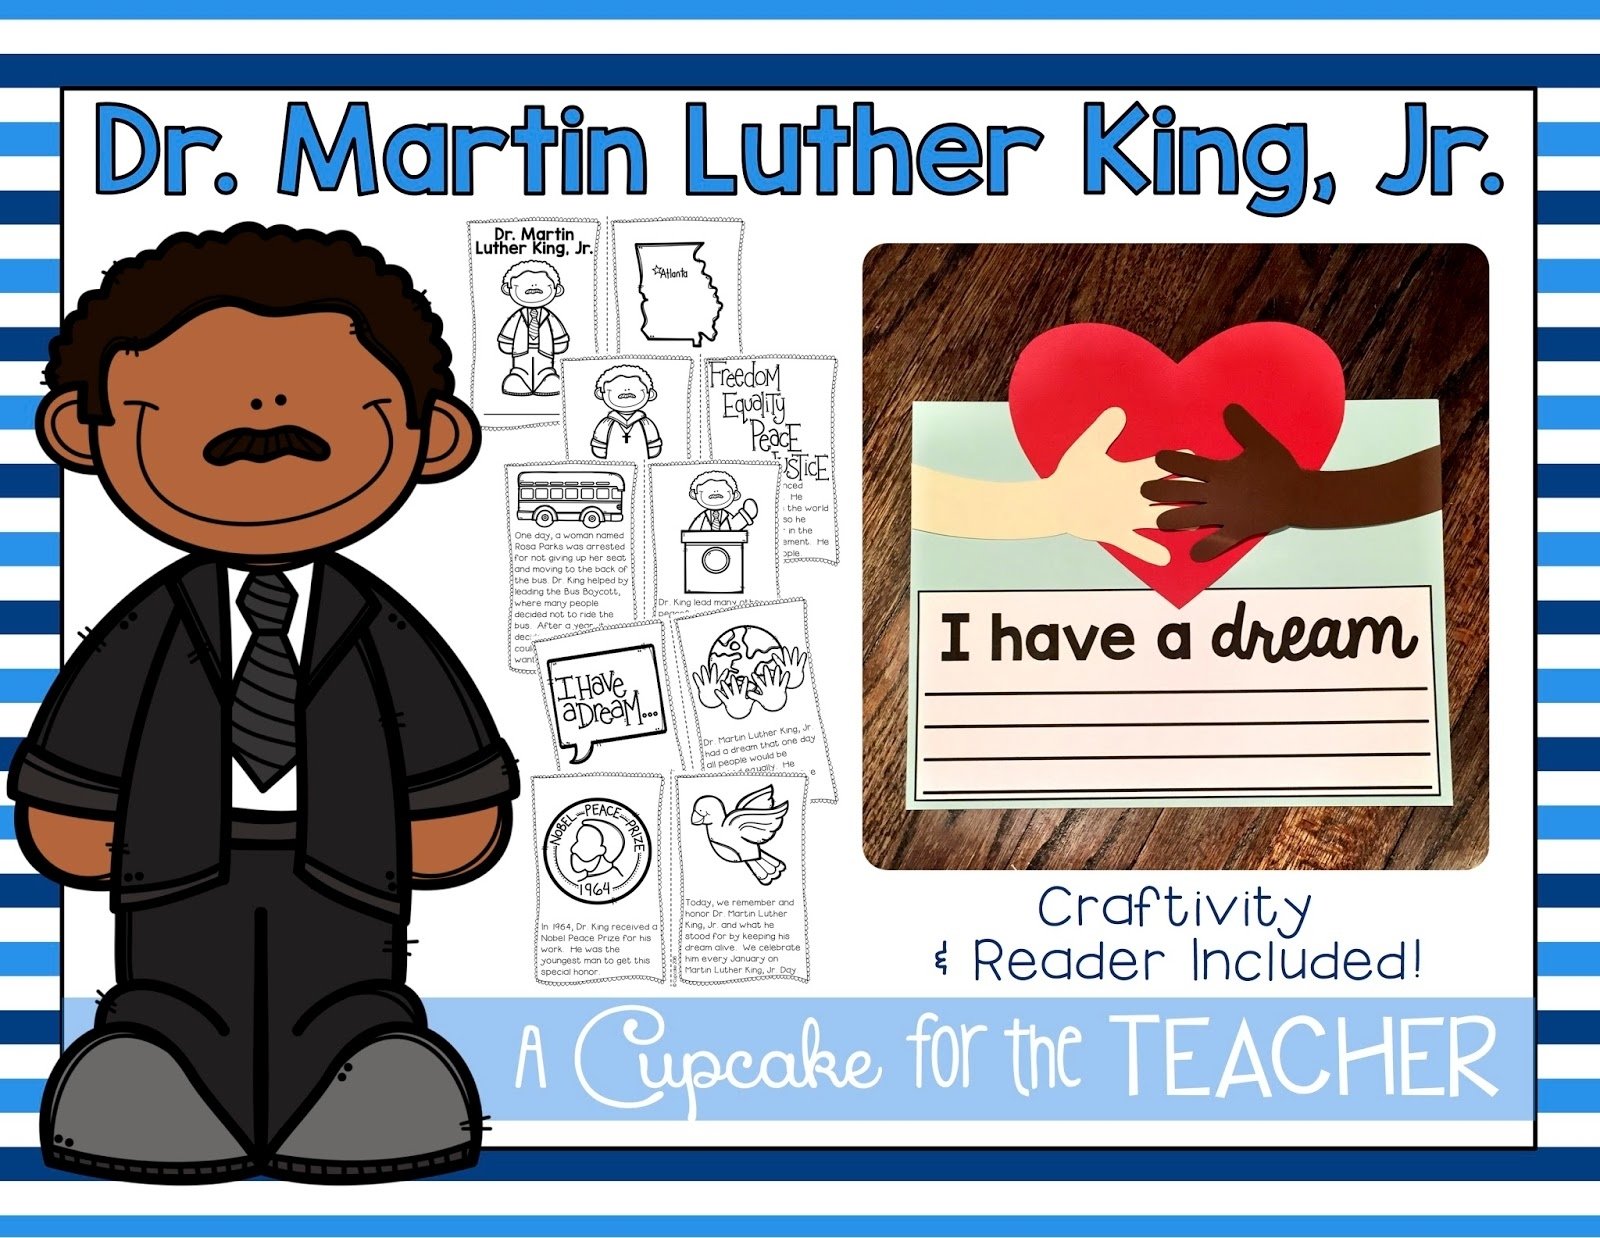 10 Perfect Martin Luther King Jr Project Ideas crafts ideas for mlk day a cupcake for the teacher 2022